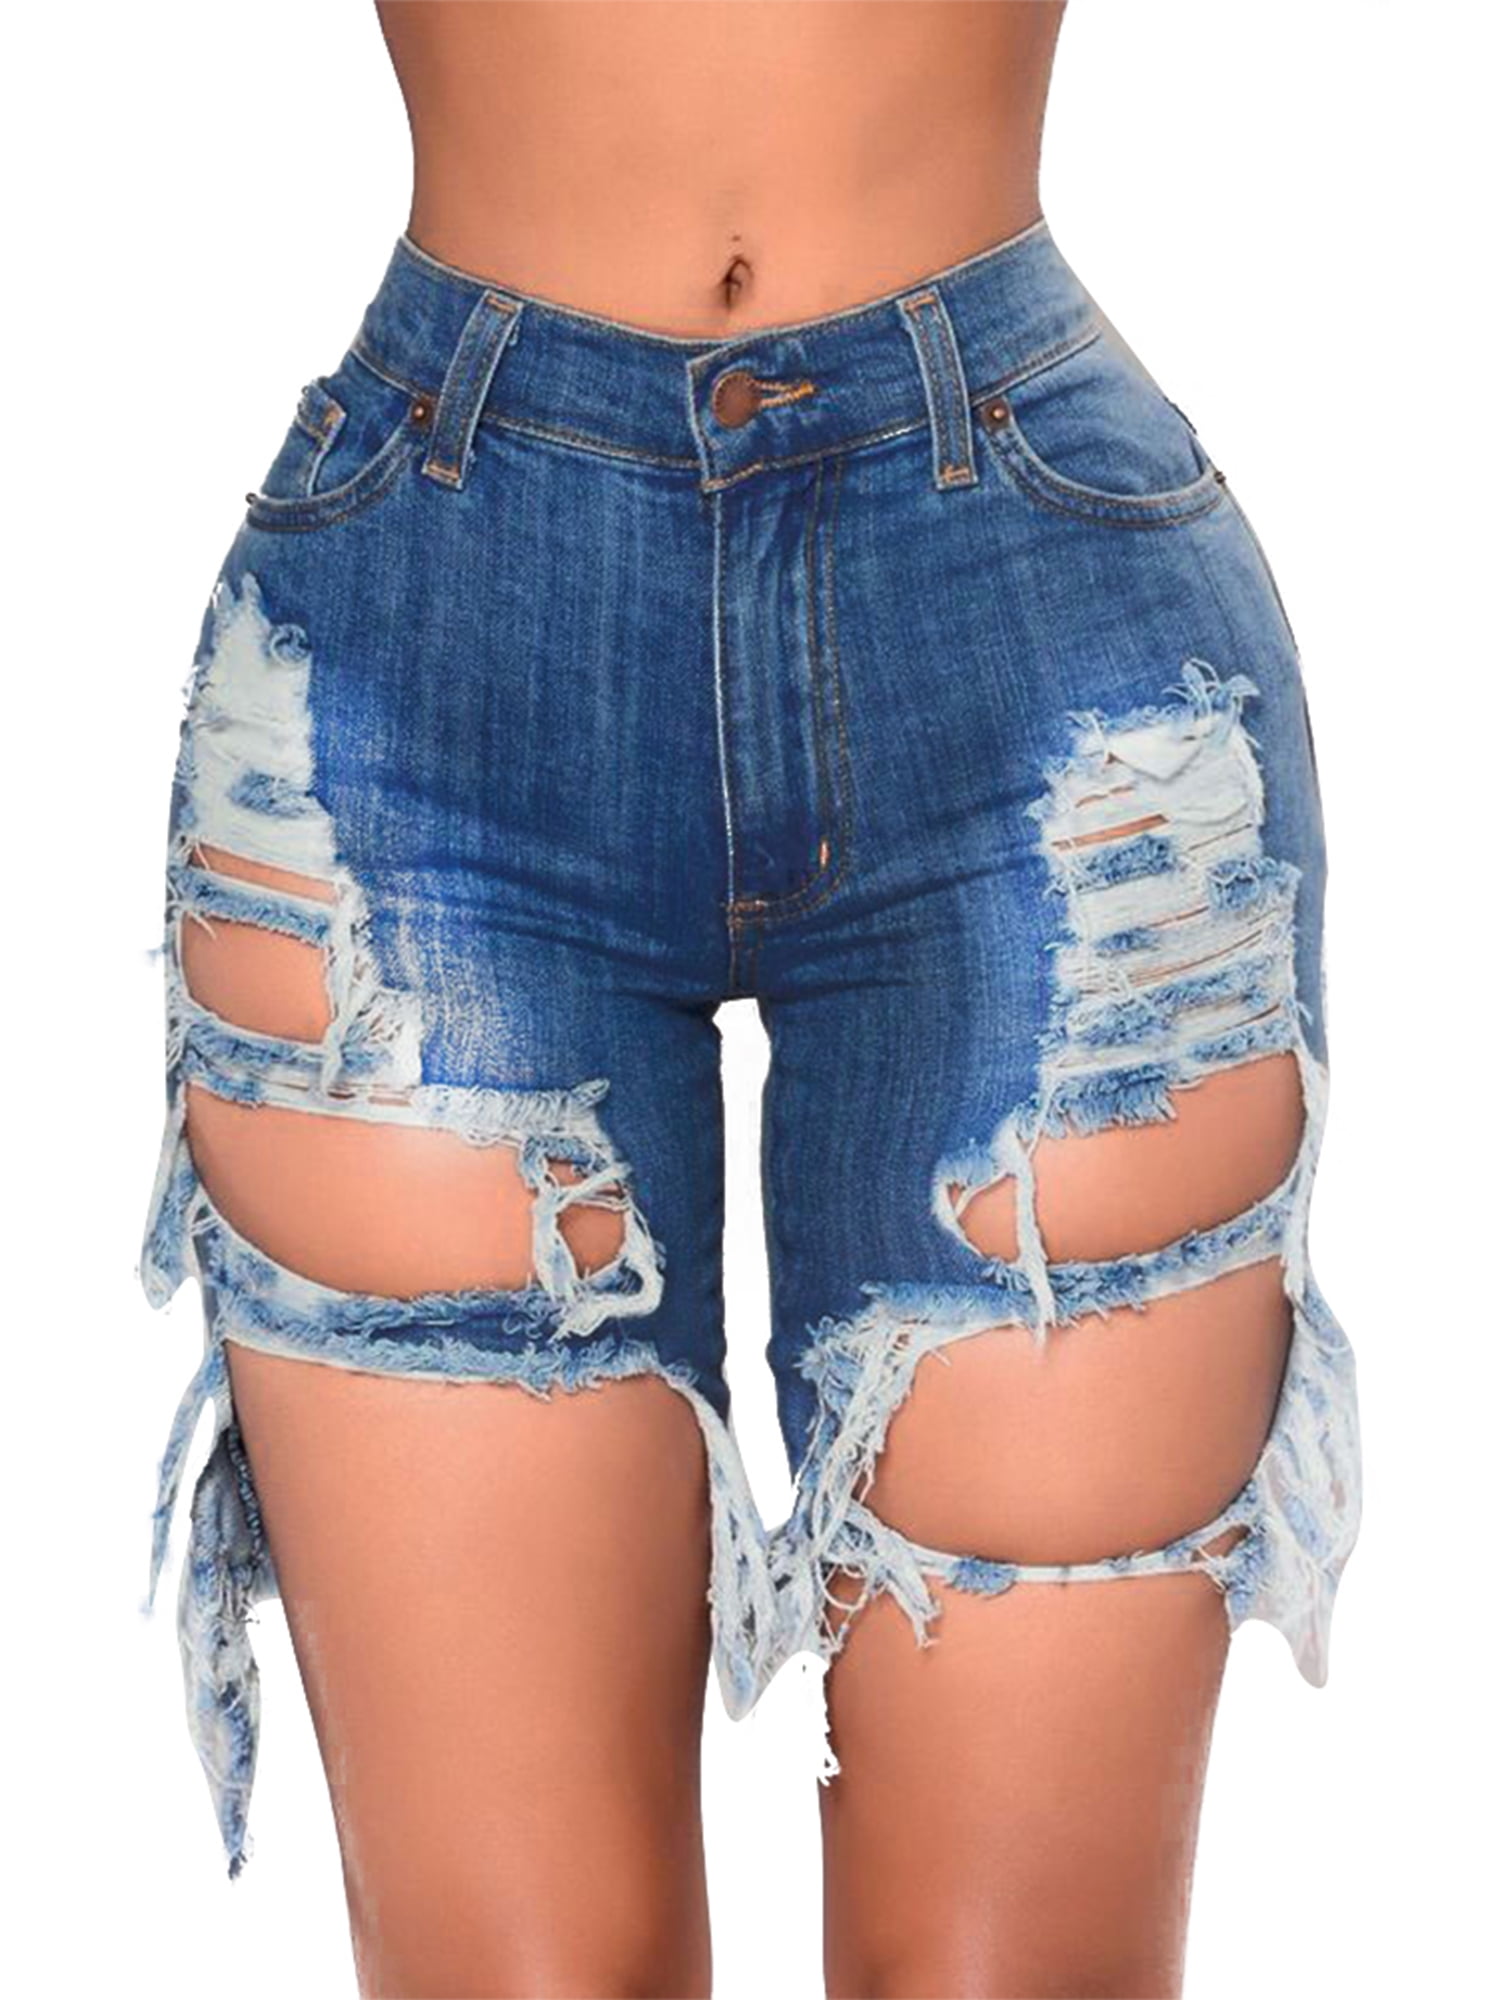 Nominering Isse Klappe Genuiskids Women Washed Jeans Shorts High Waist Ripped Hole Washed Distressed  Denim Shorts Summer Sexy Hot Shorts with Pockets - Walmart.com